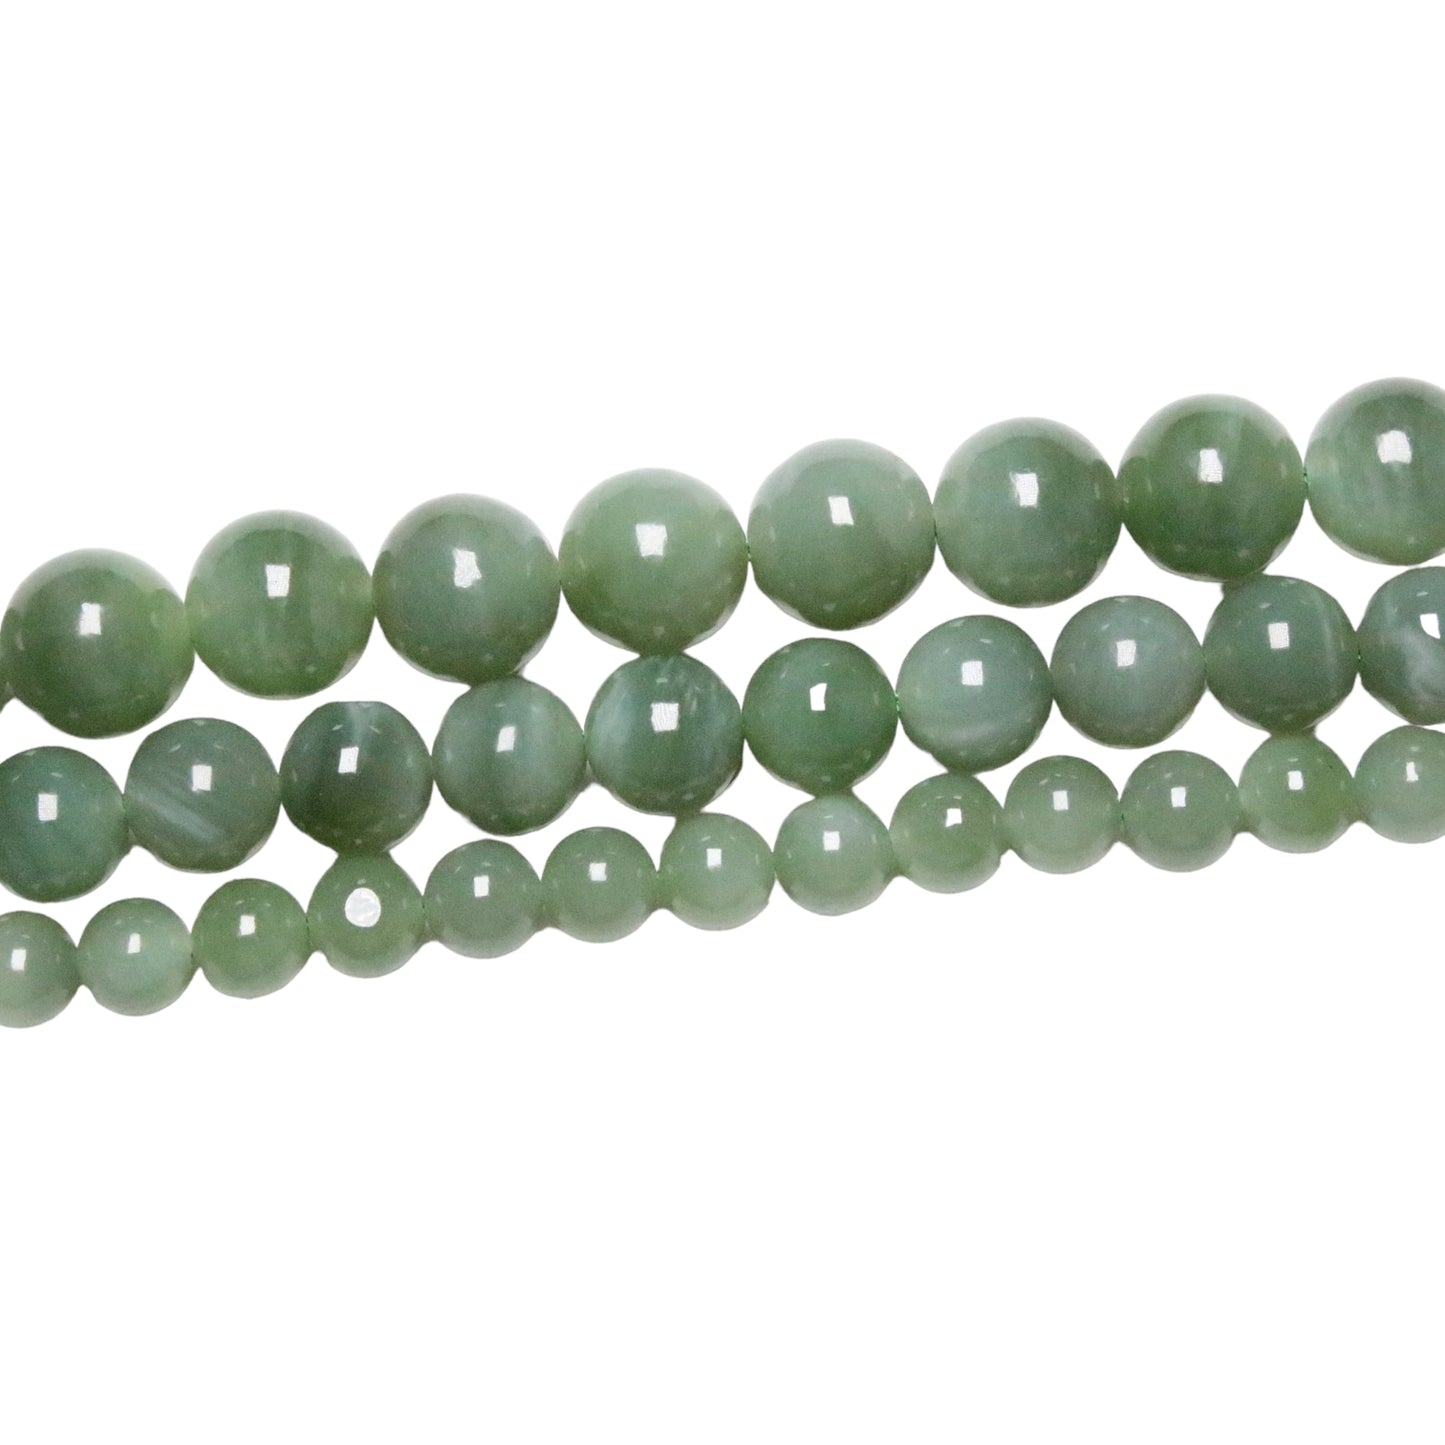 Jade nephrite pearl thread from Russia